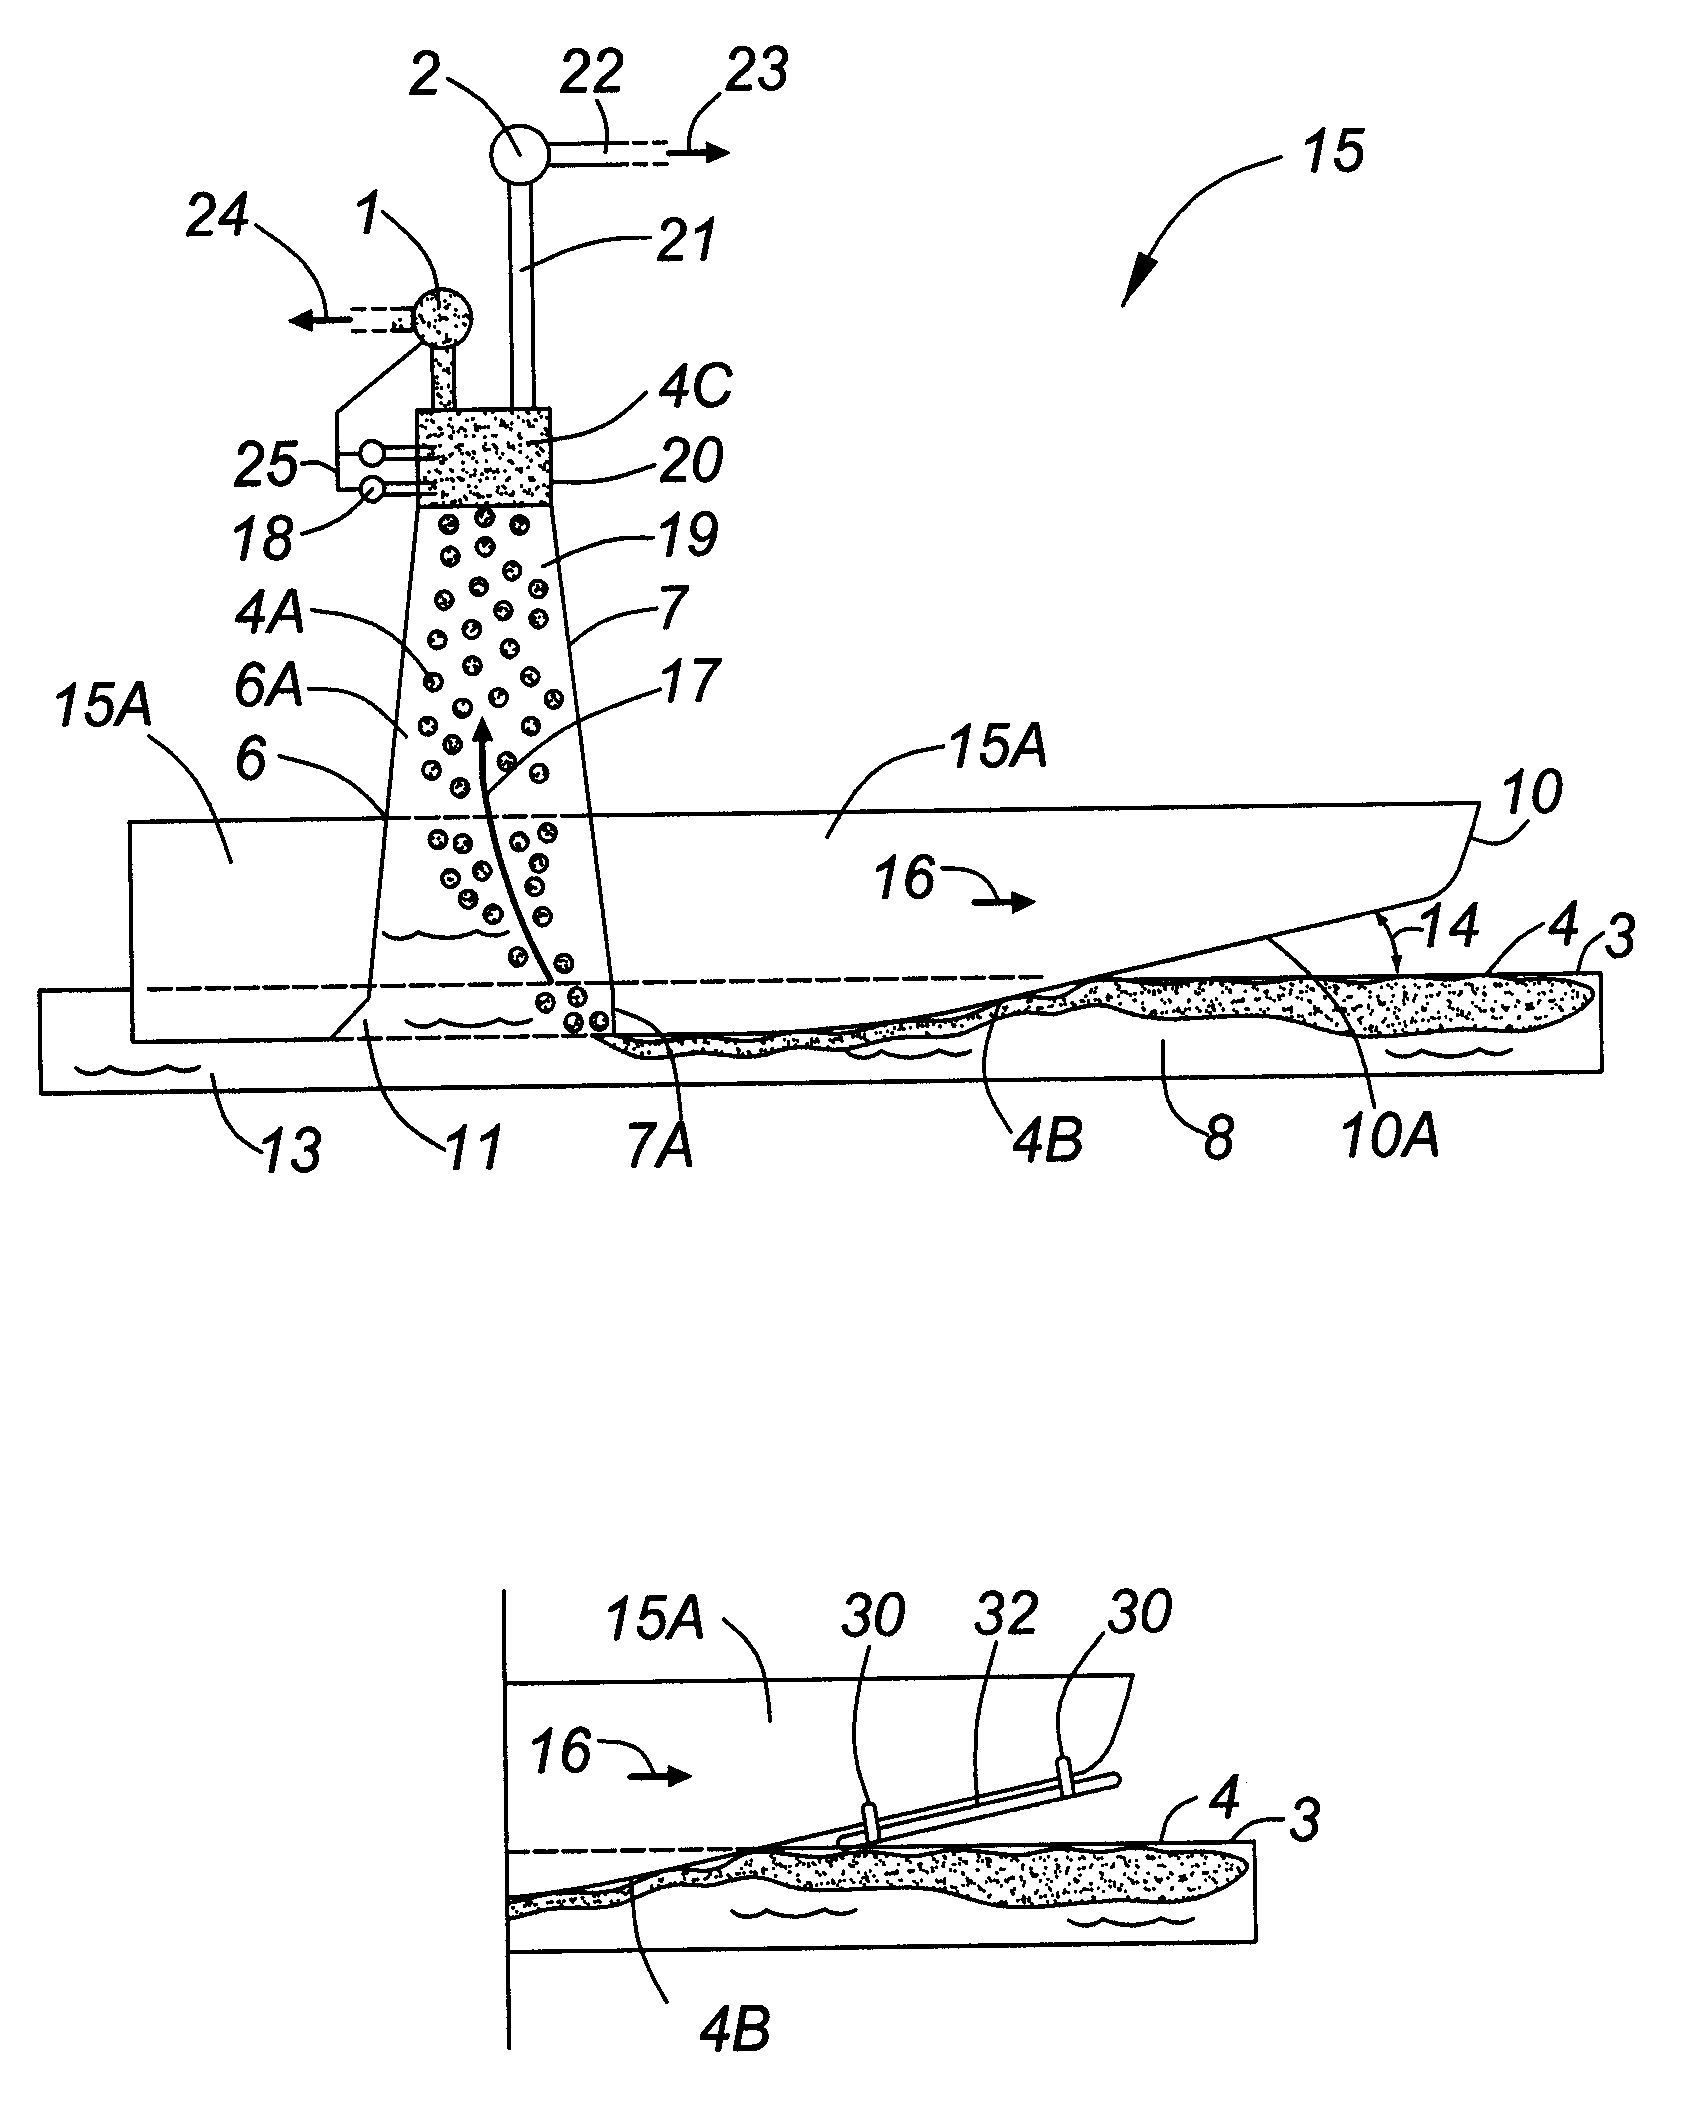 Device and method for cleaning up spilled oil and other liquids